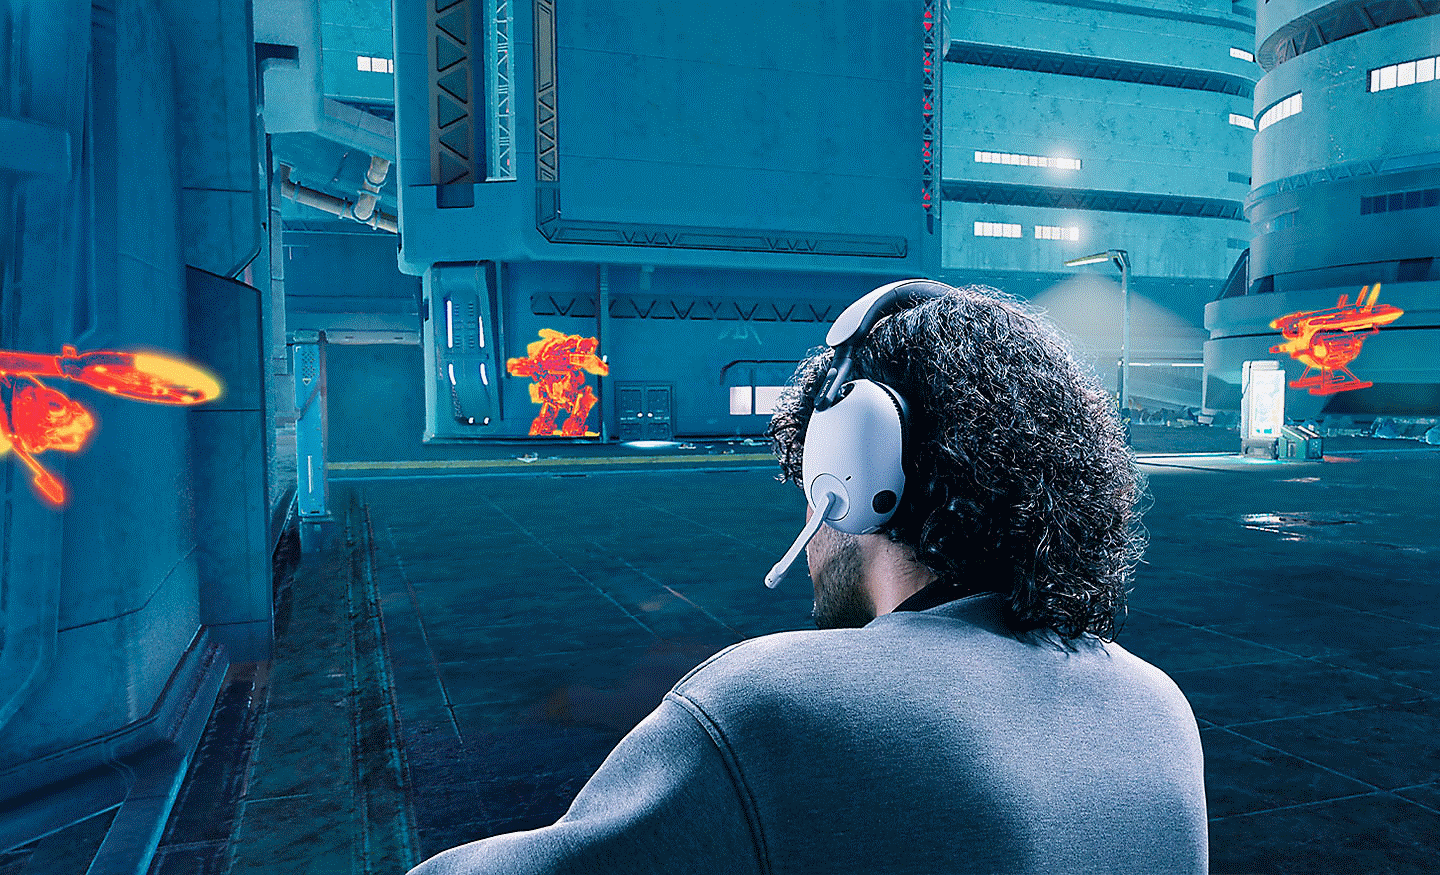 Image of an in-game VALORANT screenshot with a man wearing an INZONE H9 gaming headset overlaid 